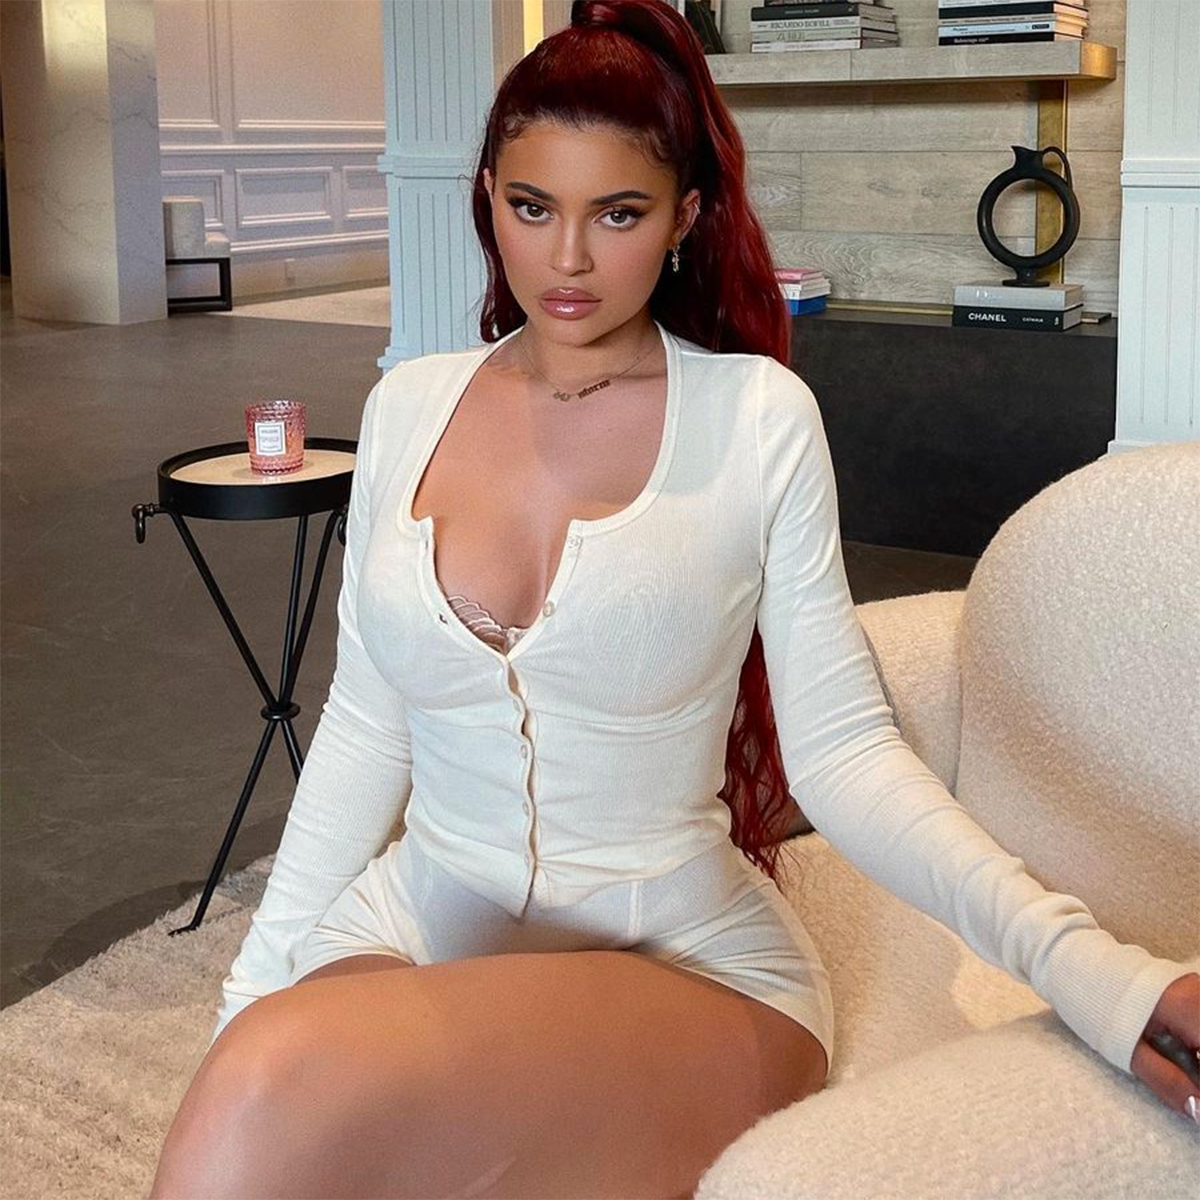 Whoa! Kylie Jenner Flaunts Big Booty & Boobs in Sexy Instagram Pics